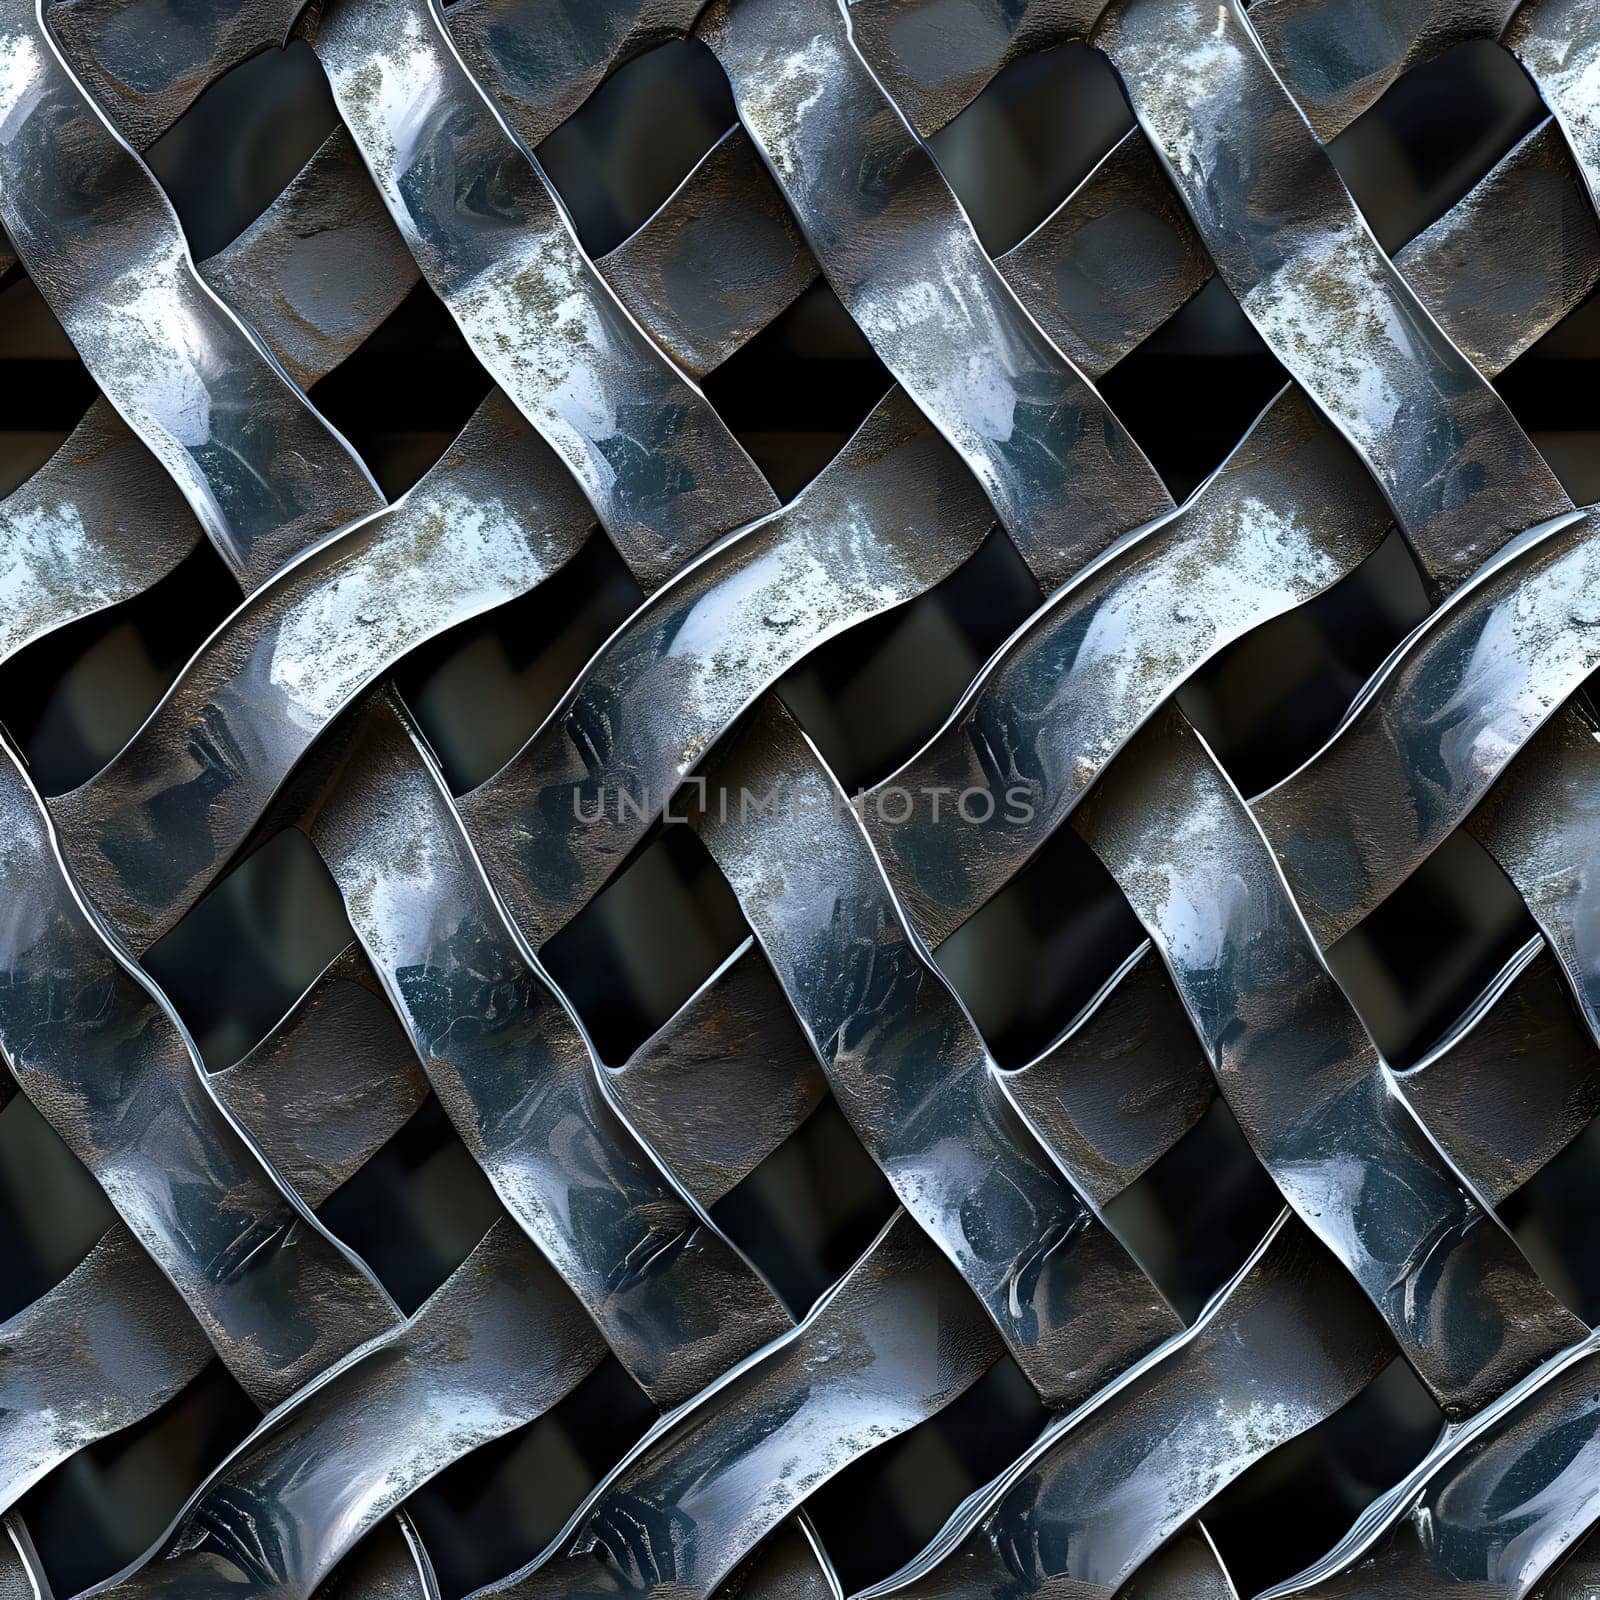 Seamless metal pattern texture. Neural network generated image. Not based on any actual scene or pattern.